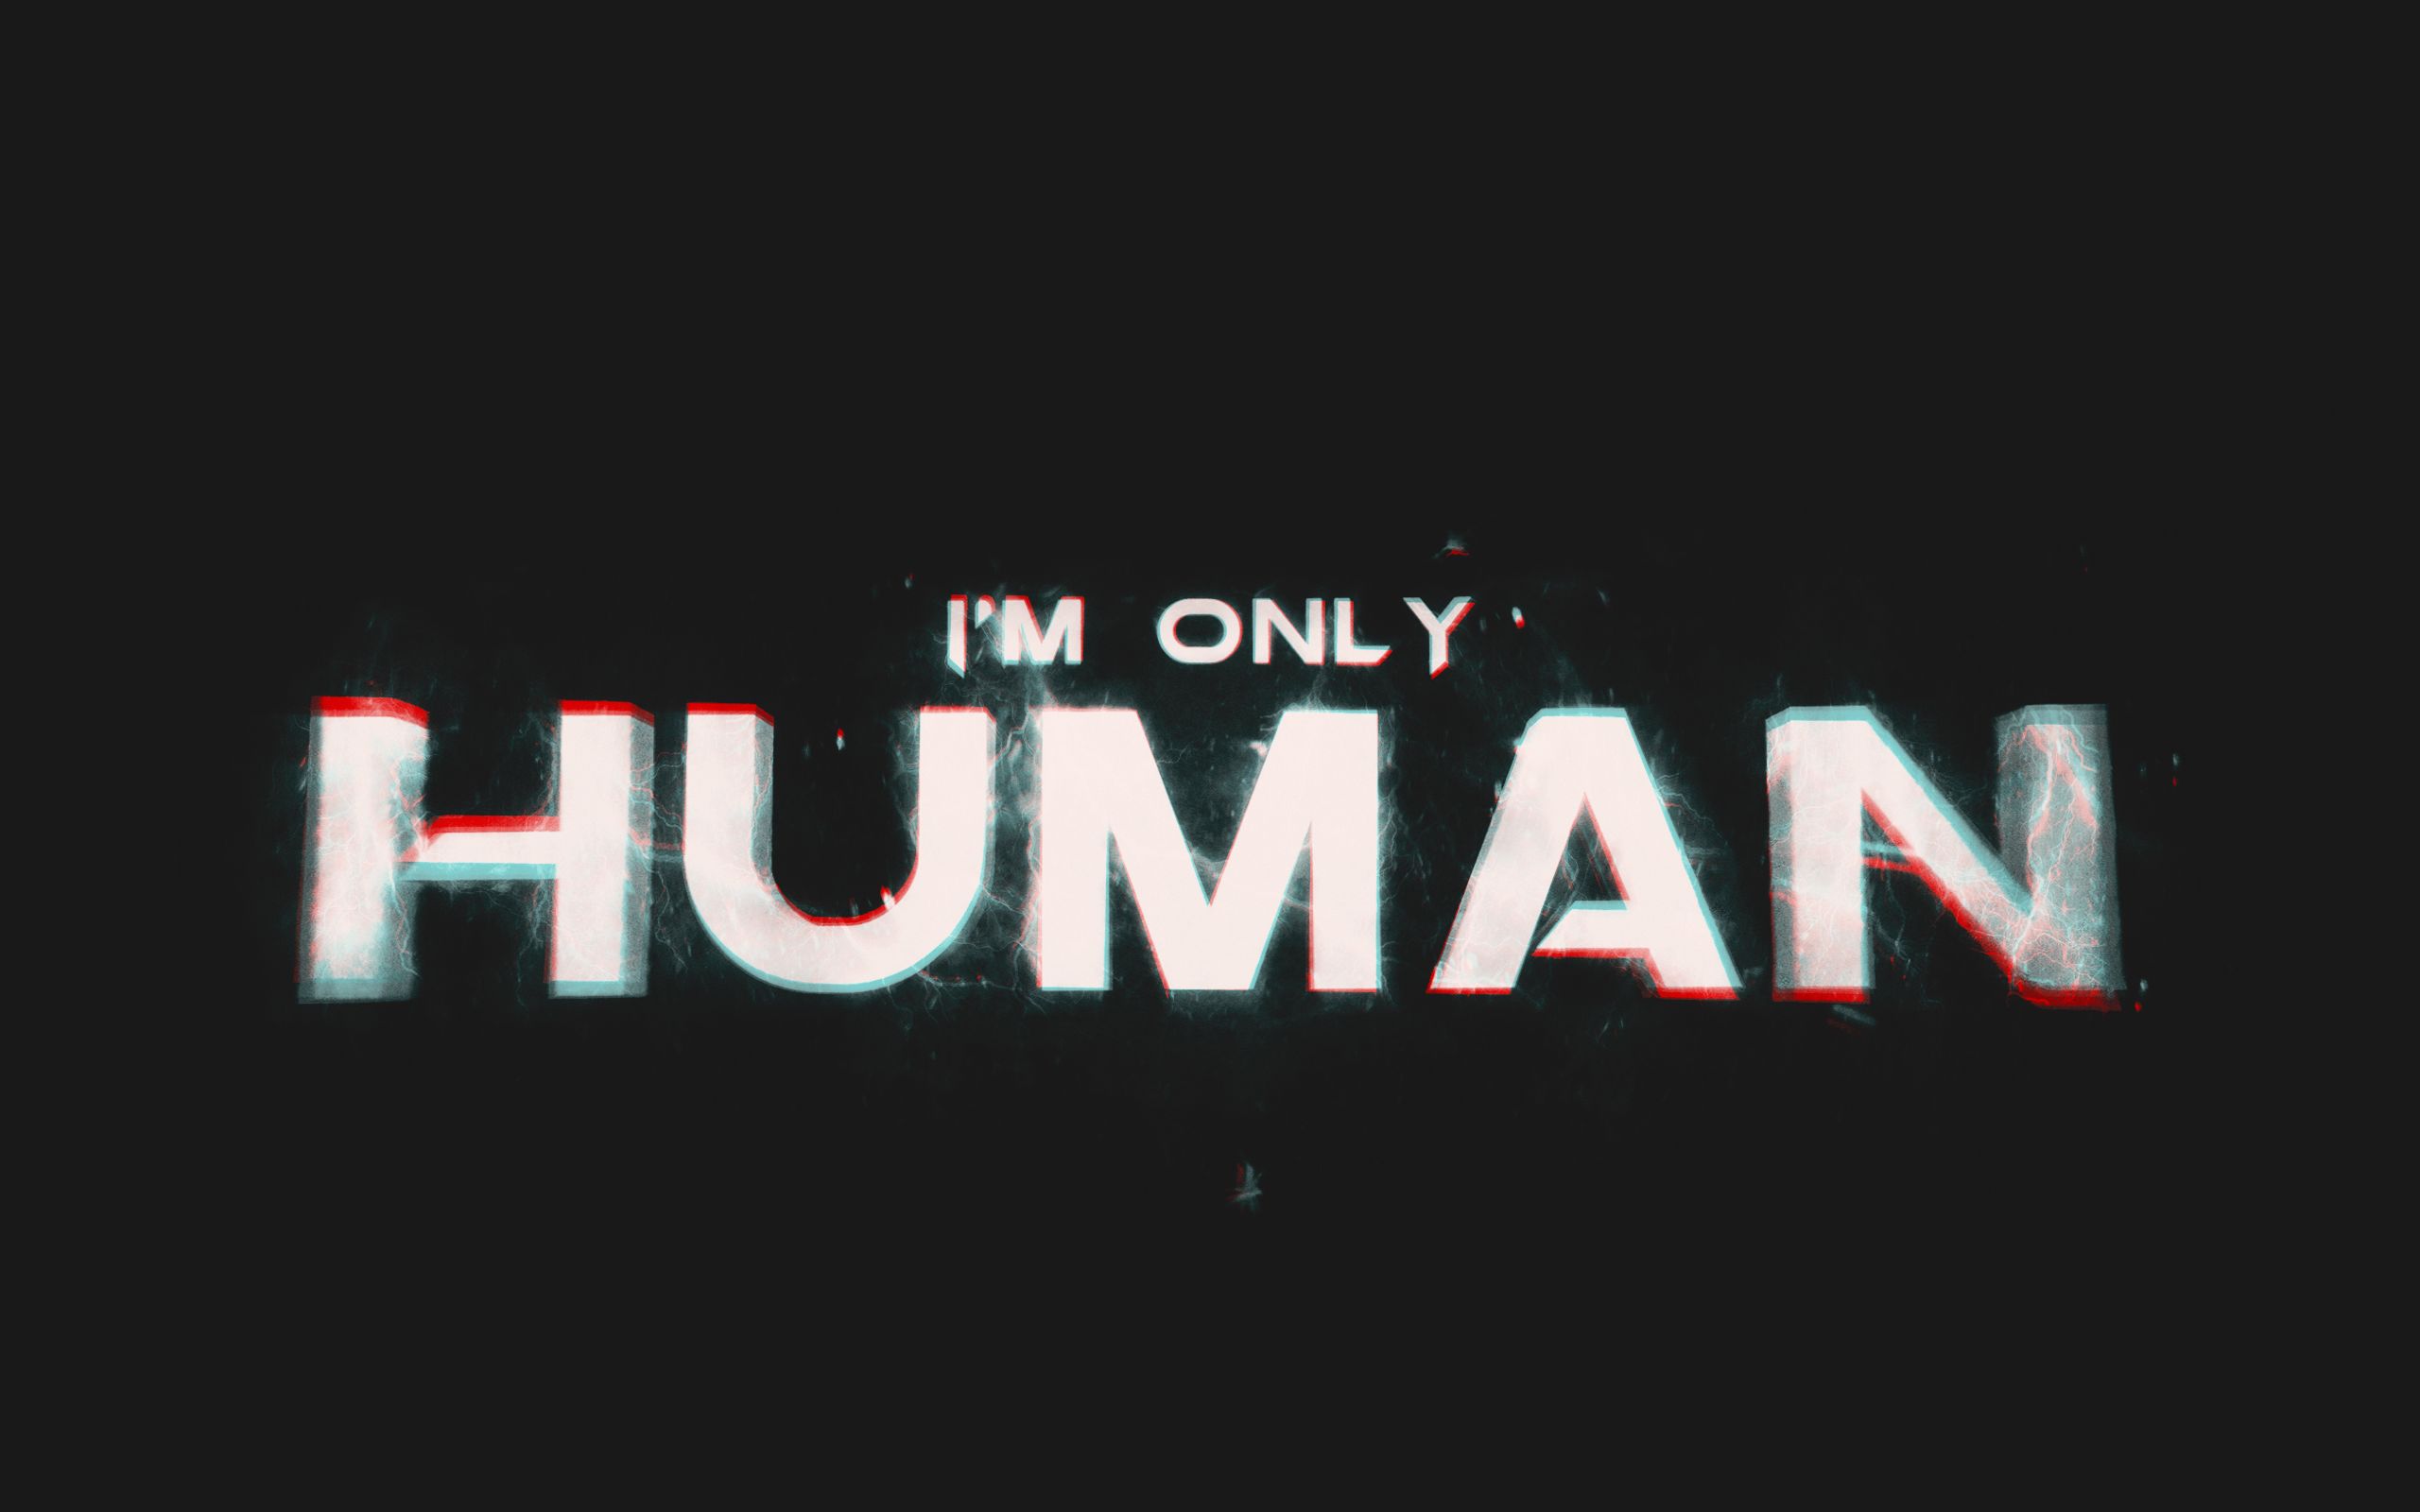 Only human after all. I M only Human. Only Human. Only Human Todd Burns. Im only Human after all.